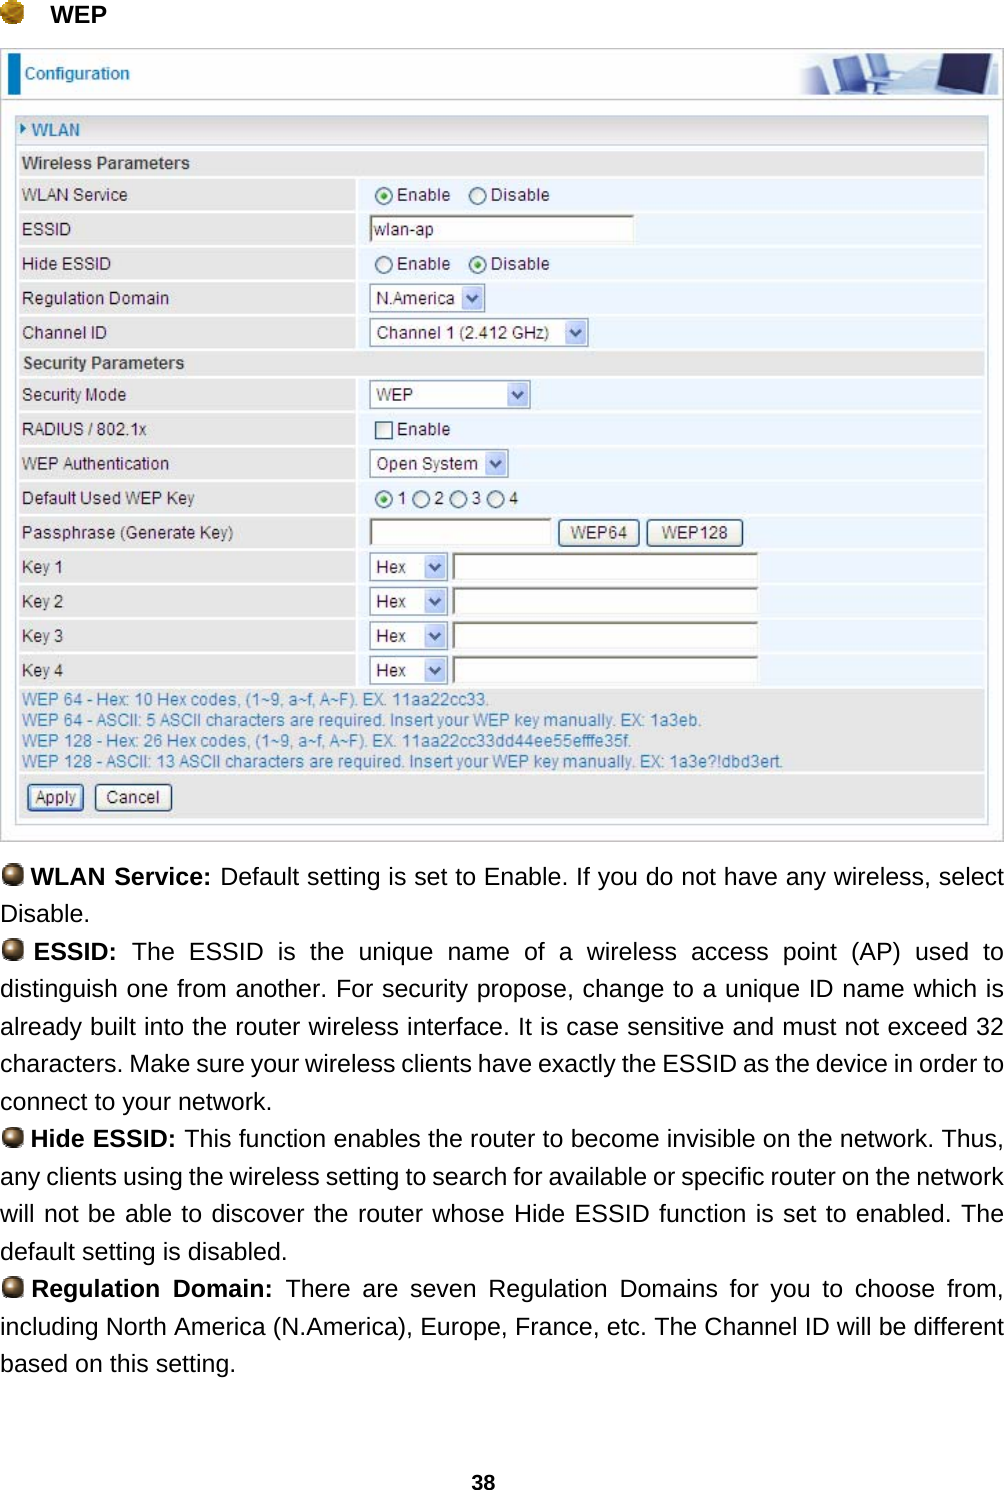 38  WEP   WLAN Service: Default setting is set to Enable. If you do not have any wireless, select Disable.  ESSID:  The ESSID is the unique name of a wireless access point (AP) used to distinguish one from another. For security propose, change to a unique ID name which is already built into the router wireless interface. It is case sensitive and must not exceed 32 characters. Make sure your wireless clients have exactly the ESSID as the device in order to connect to your network.  Hide ESSID: This function enables the router to become invisible on the network. Thus, any clients using the wireless setting to search for available or specific router on the network will not be able to discover the router whose Hide ESSID function is set to enabled. The default setting is disabled.  Regulation Domain: There are seven Regulation Domains for you to choose from, including North America (N.America), Europe, France, etc. The Channel ID will be different based on this setting.  